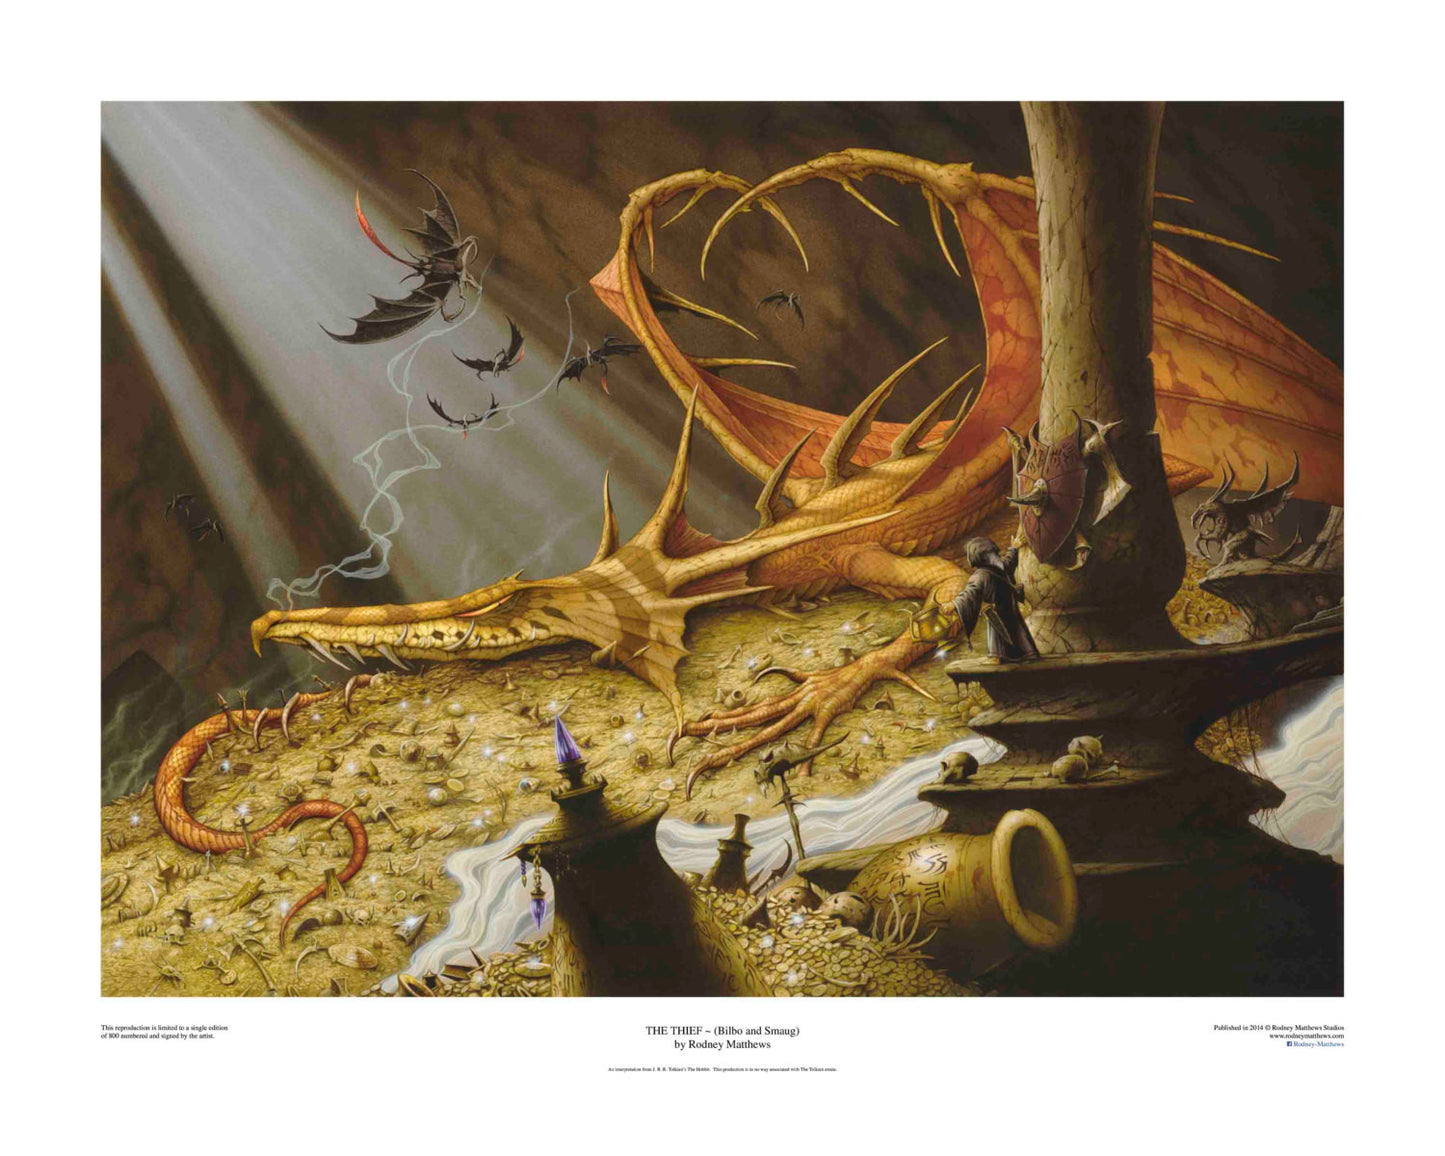 The Hobbit: The Thief limited edition giclèe art print